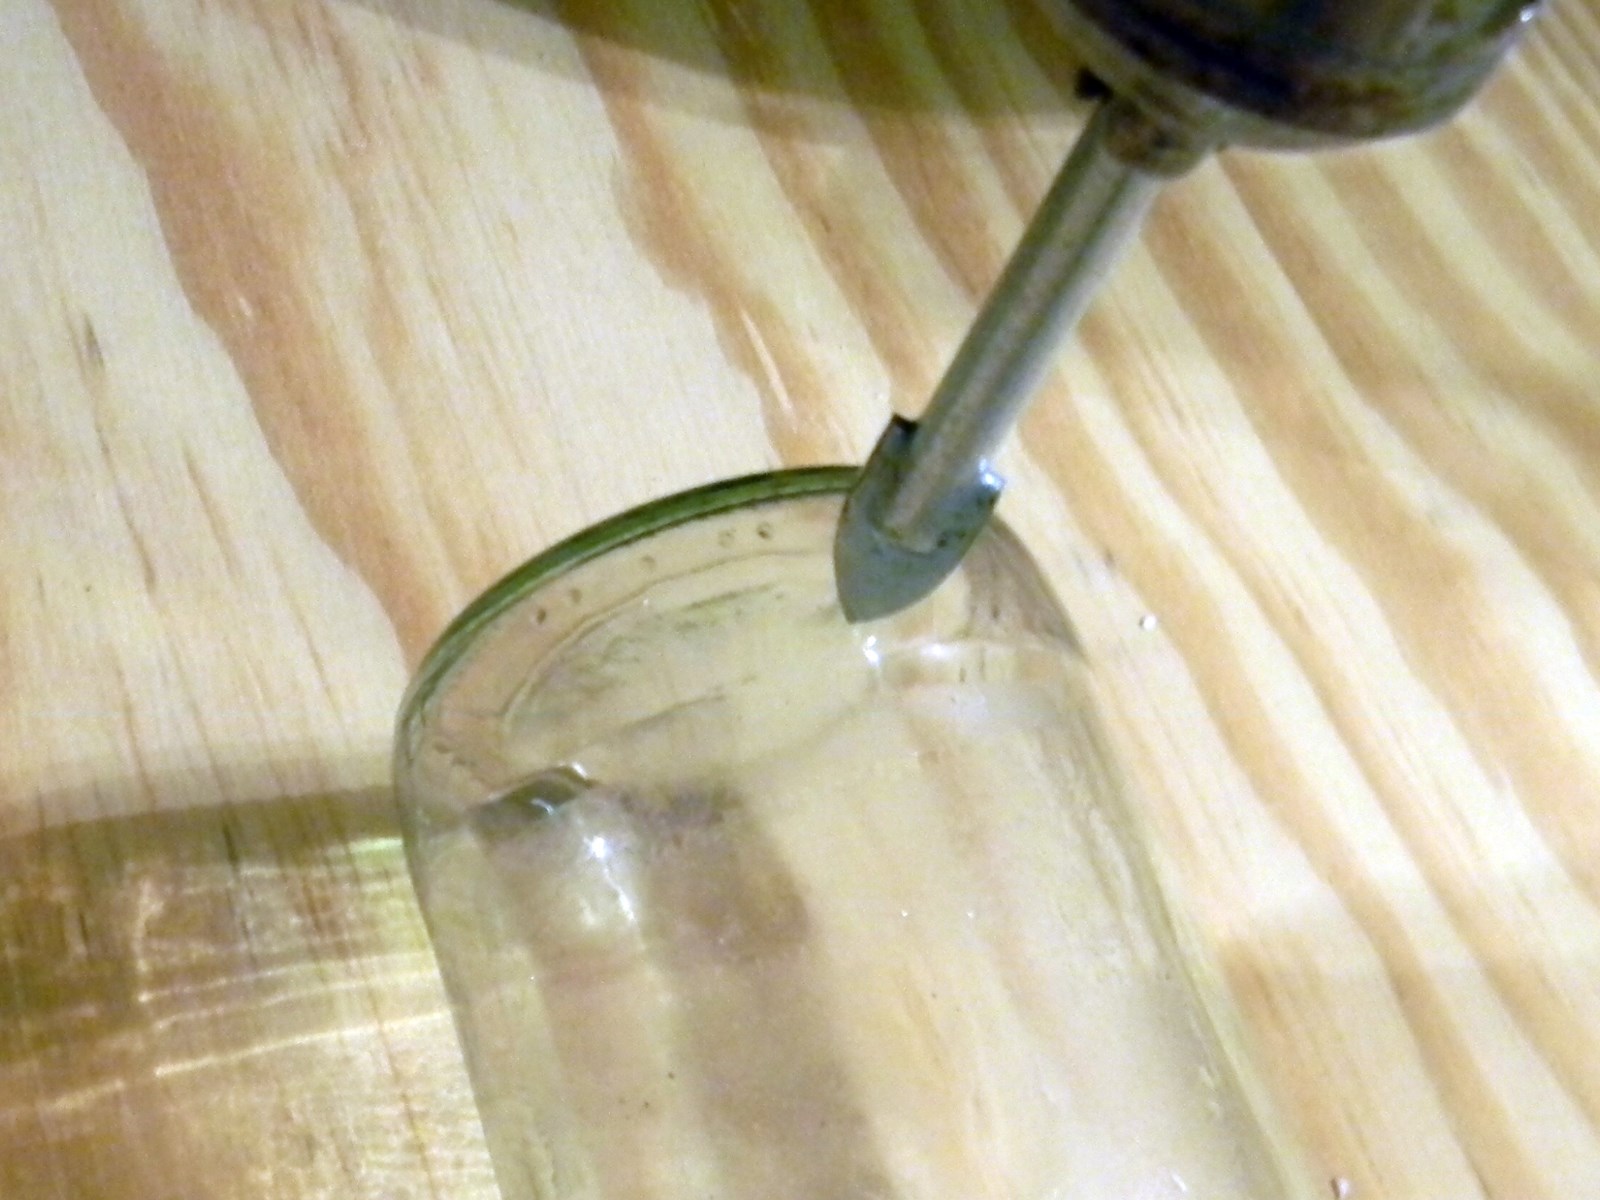 How To Drill Hole In Glass Bottle